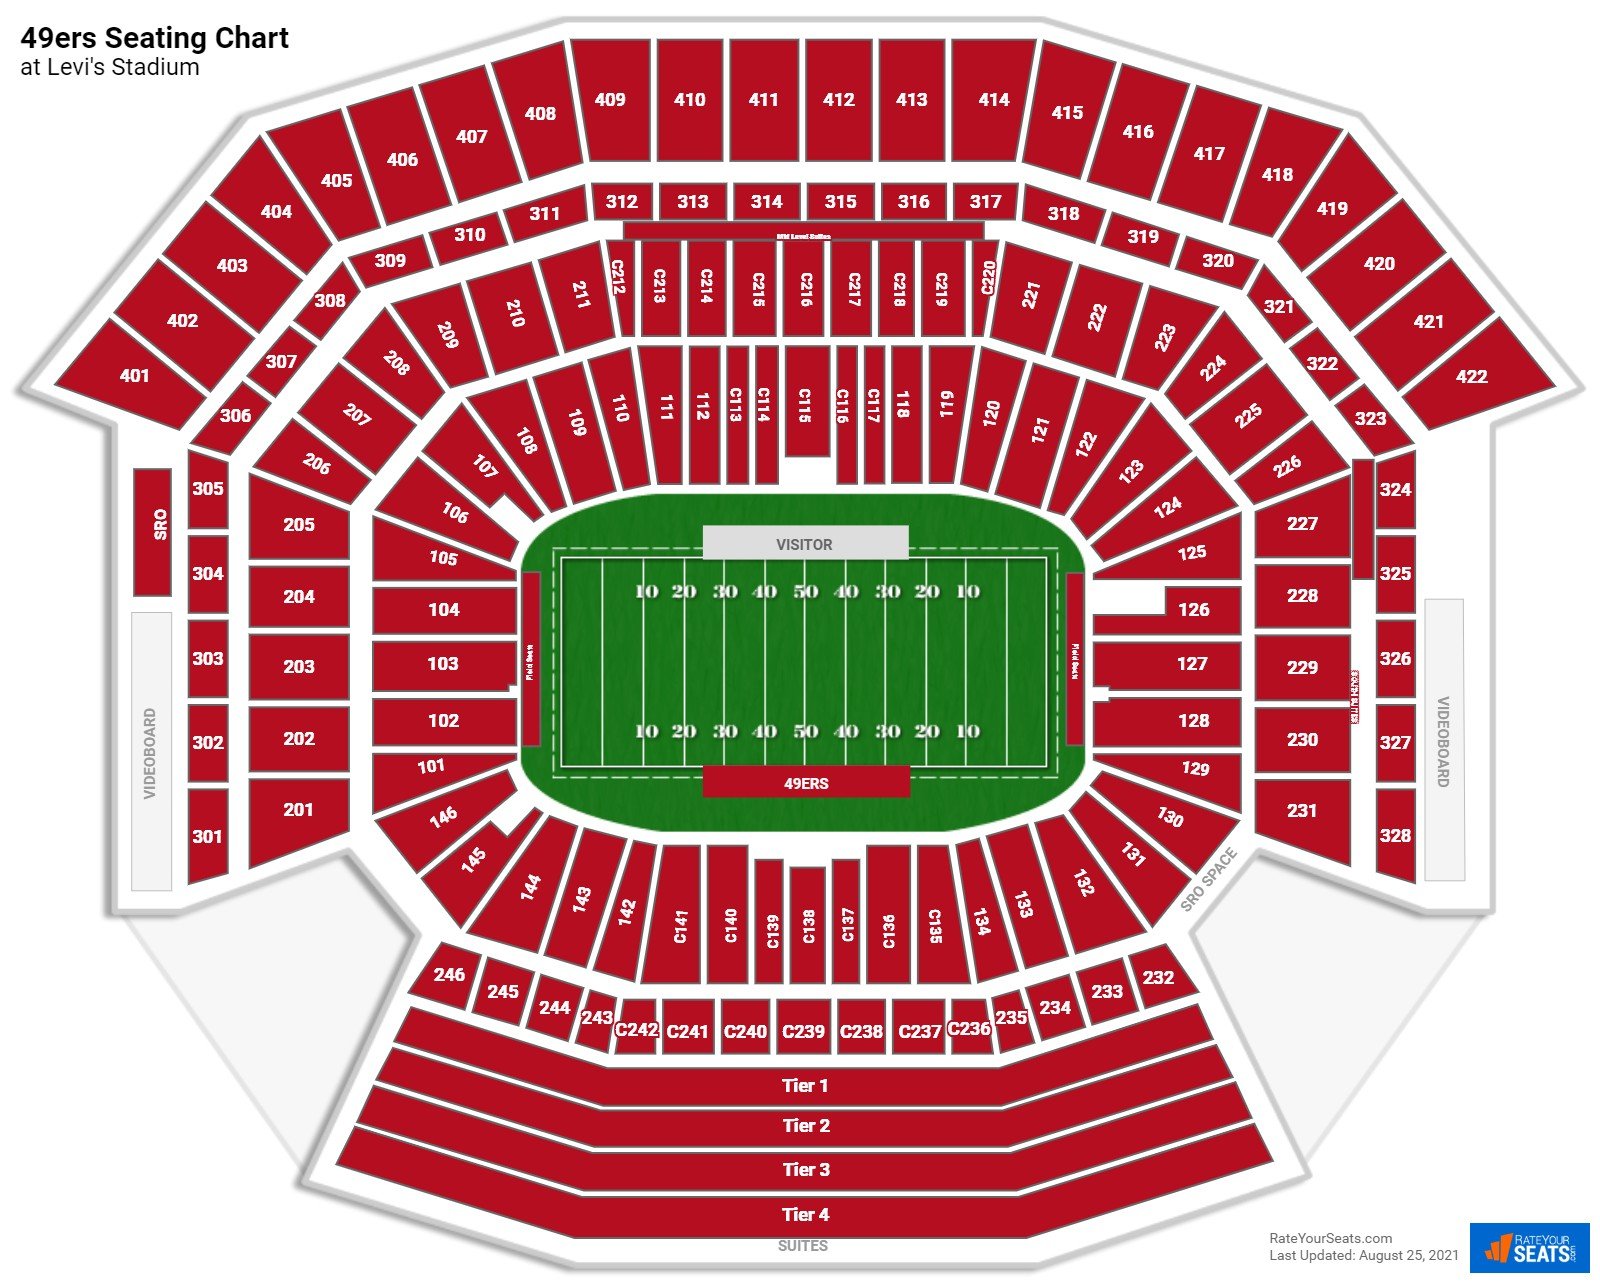 Actualizar 51+ imagen levi’s stadium seat map with seat numbers